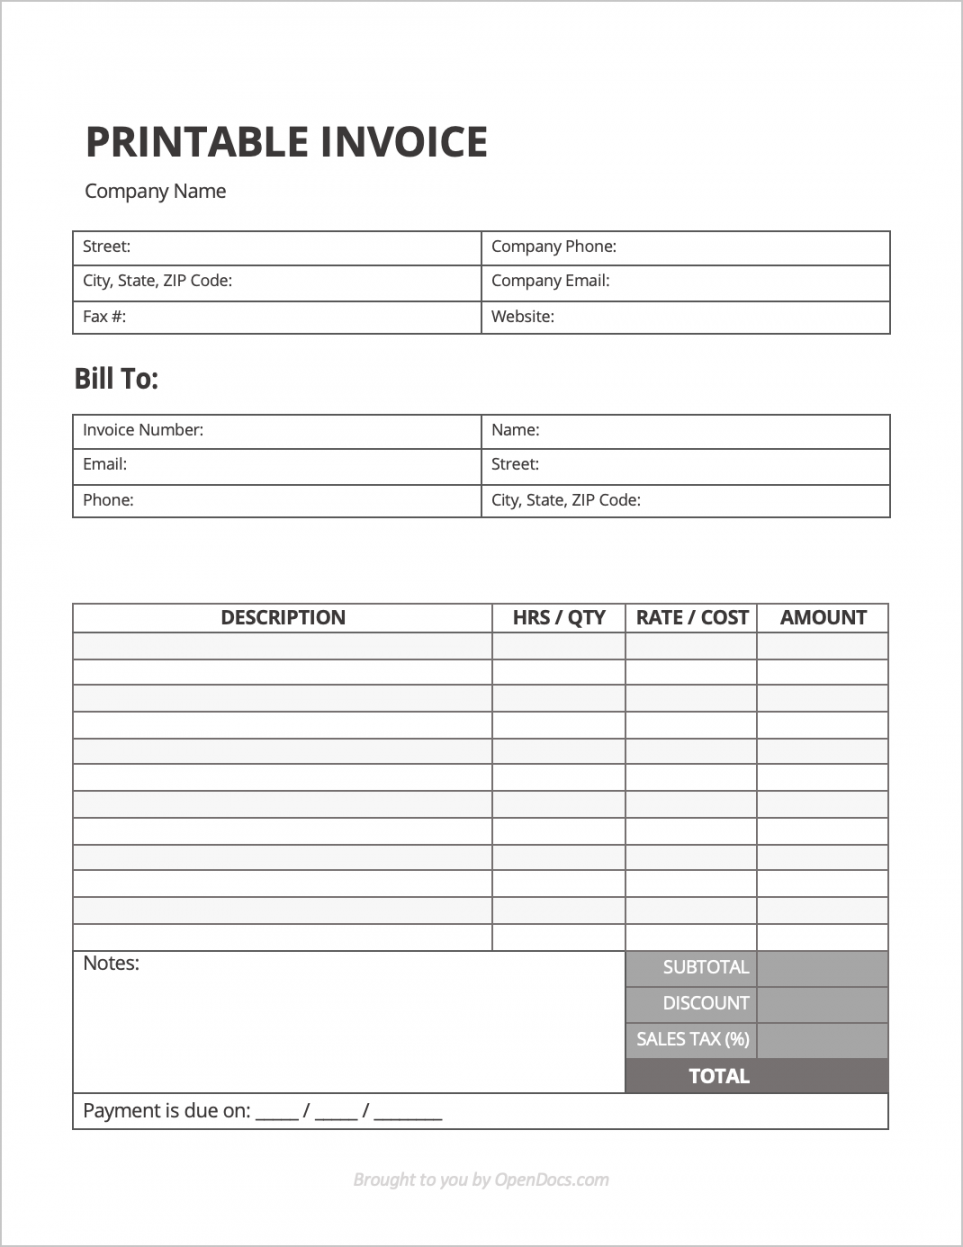 Printable Invoices For Free - Printable - Free Printable Invoice Template  PDF  WORD  EXCEL